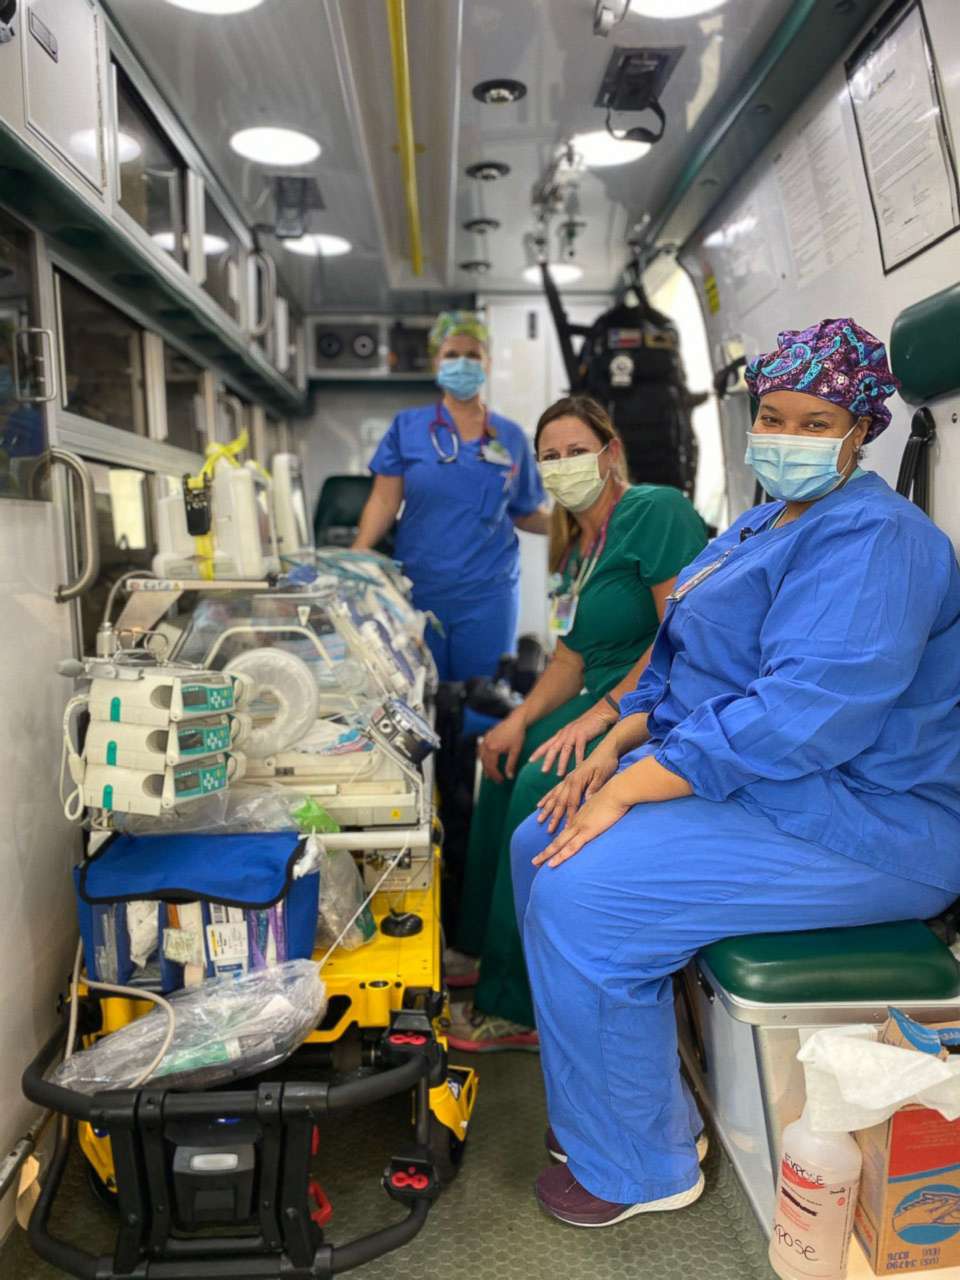 PHOTO: NICU nurses from CHRISTUS Southeast Texas Health System in Beaumont, Texas, rescued babies from the NICU at a Hurricane Laura-damaged hospital in Lake Charles, Louisiana.